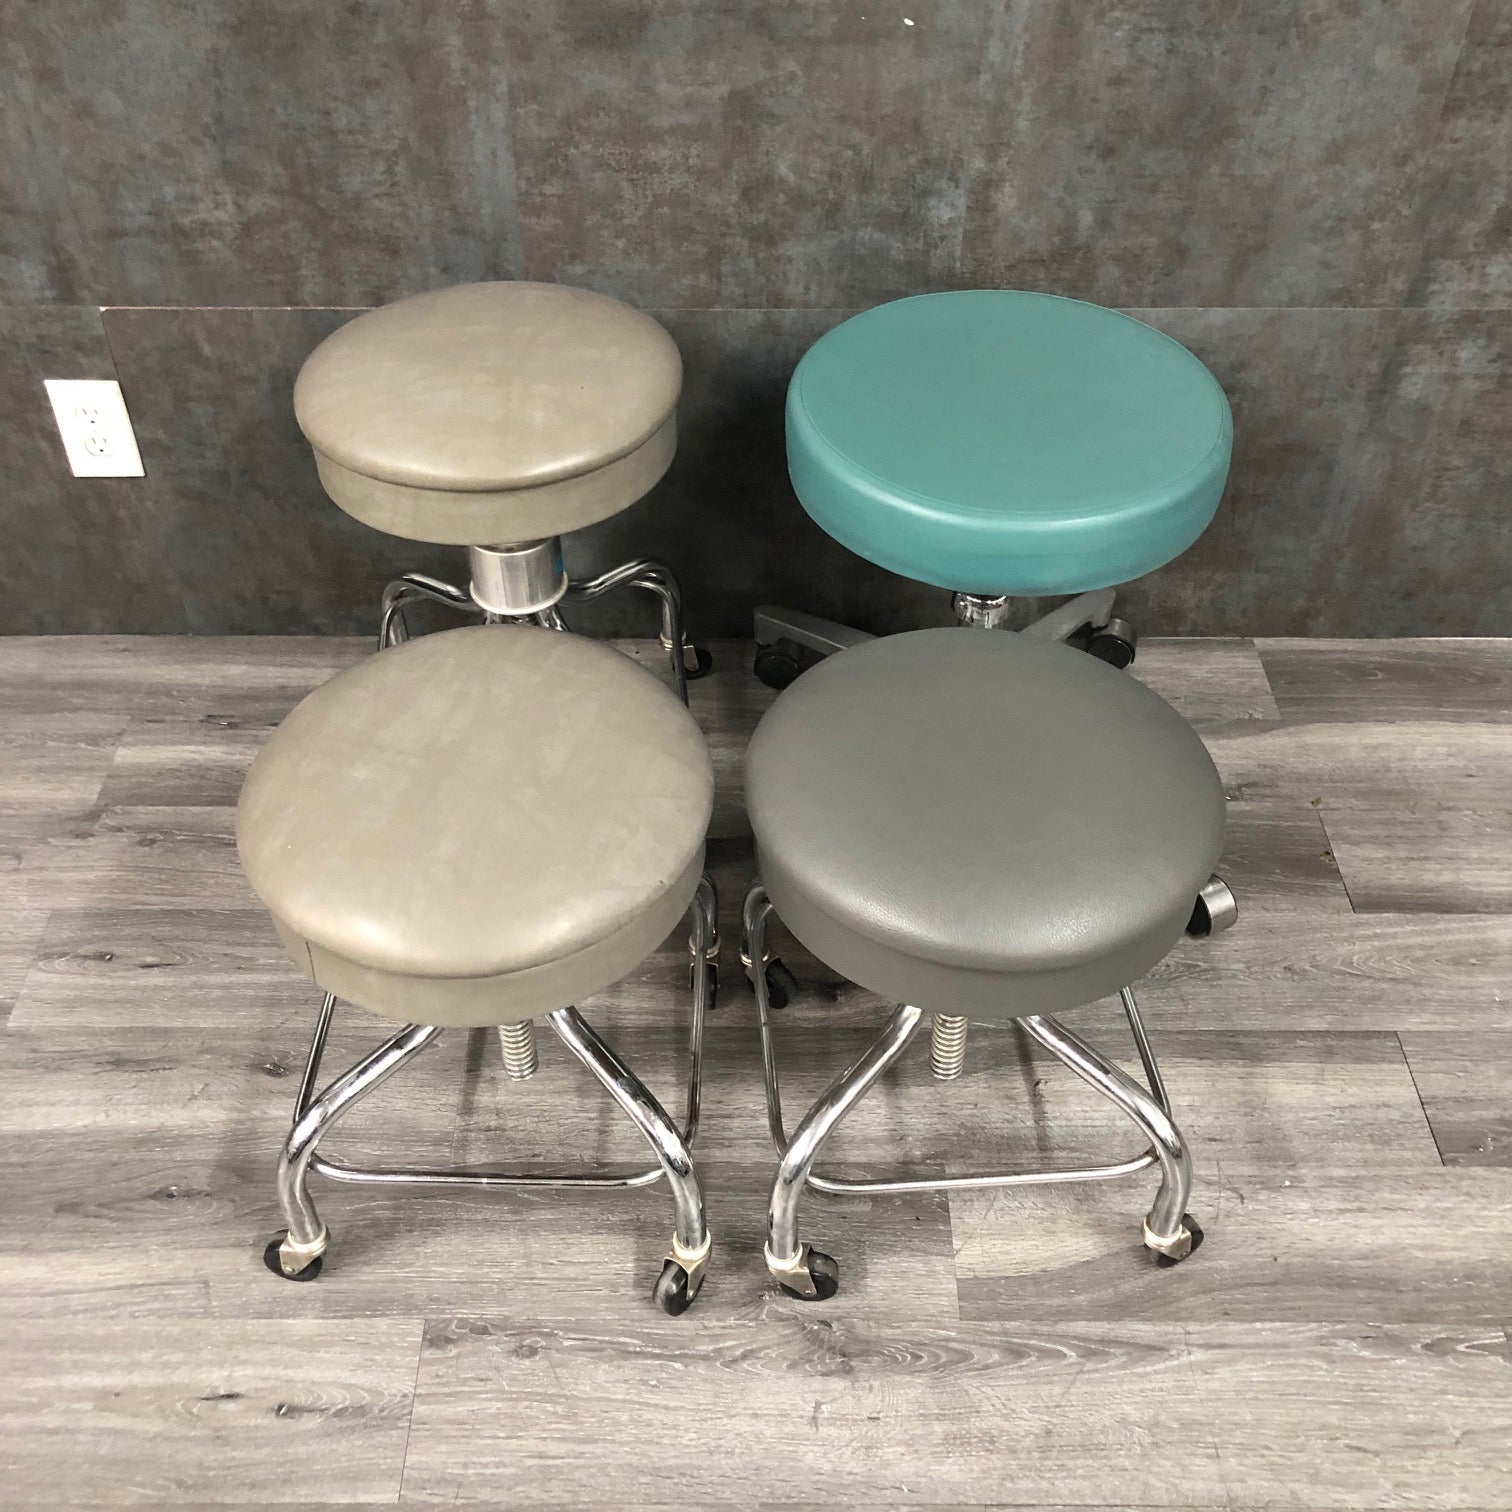 Physician Stool (Used)